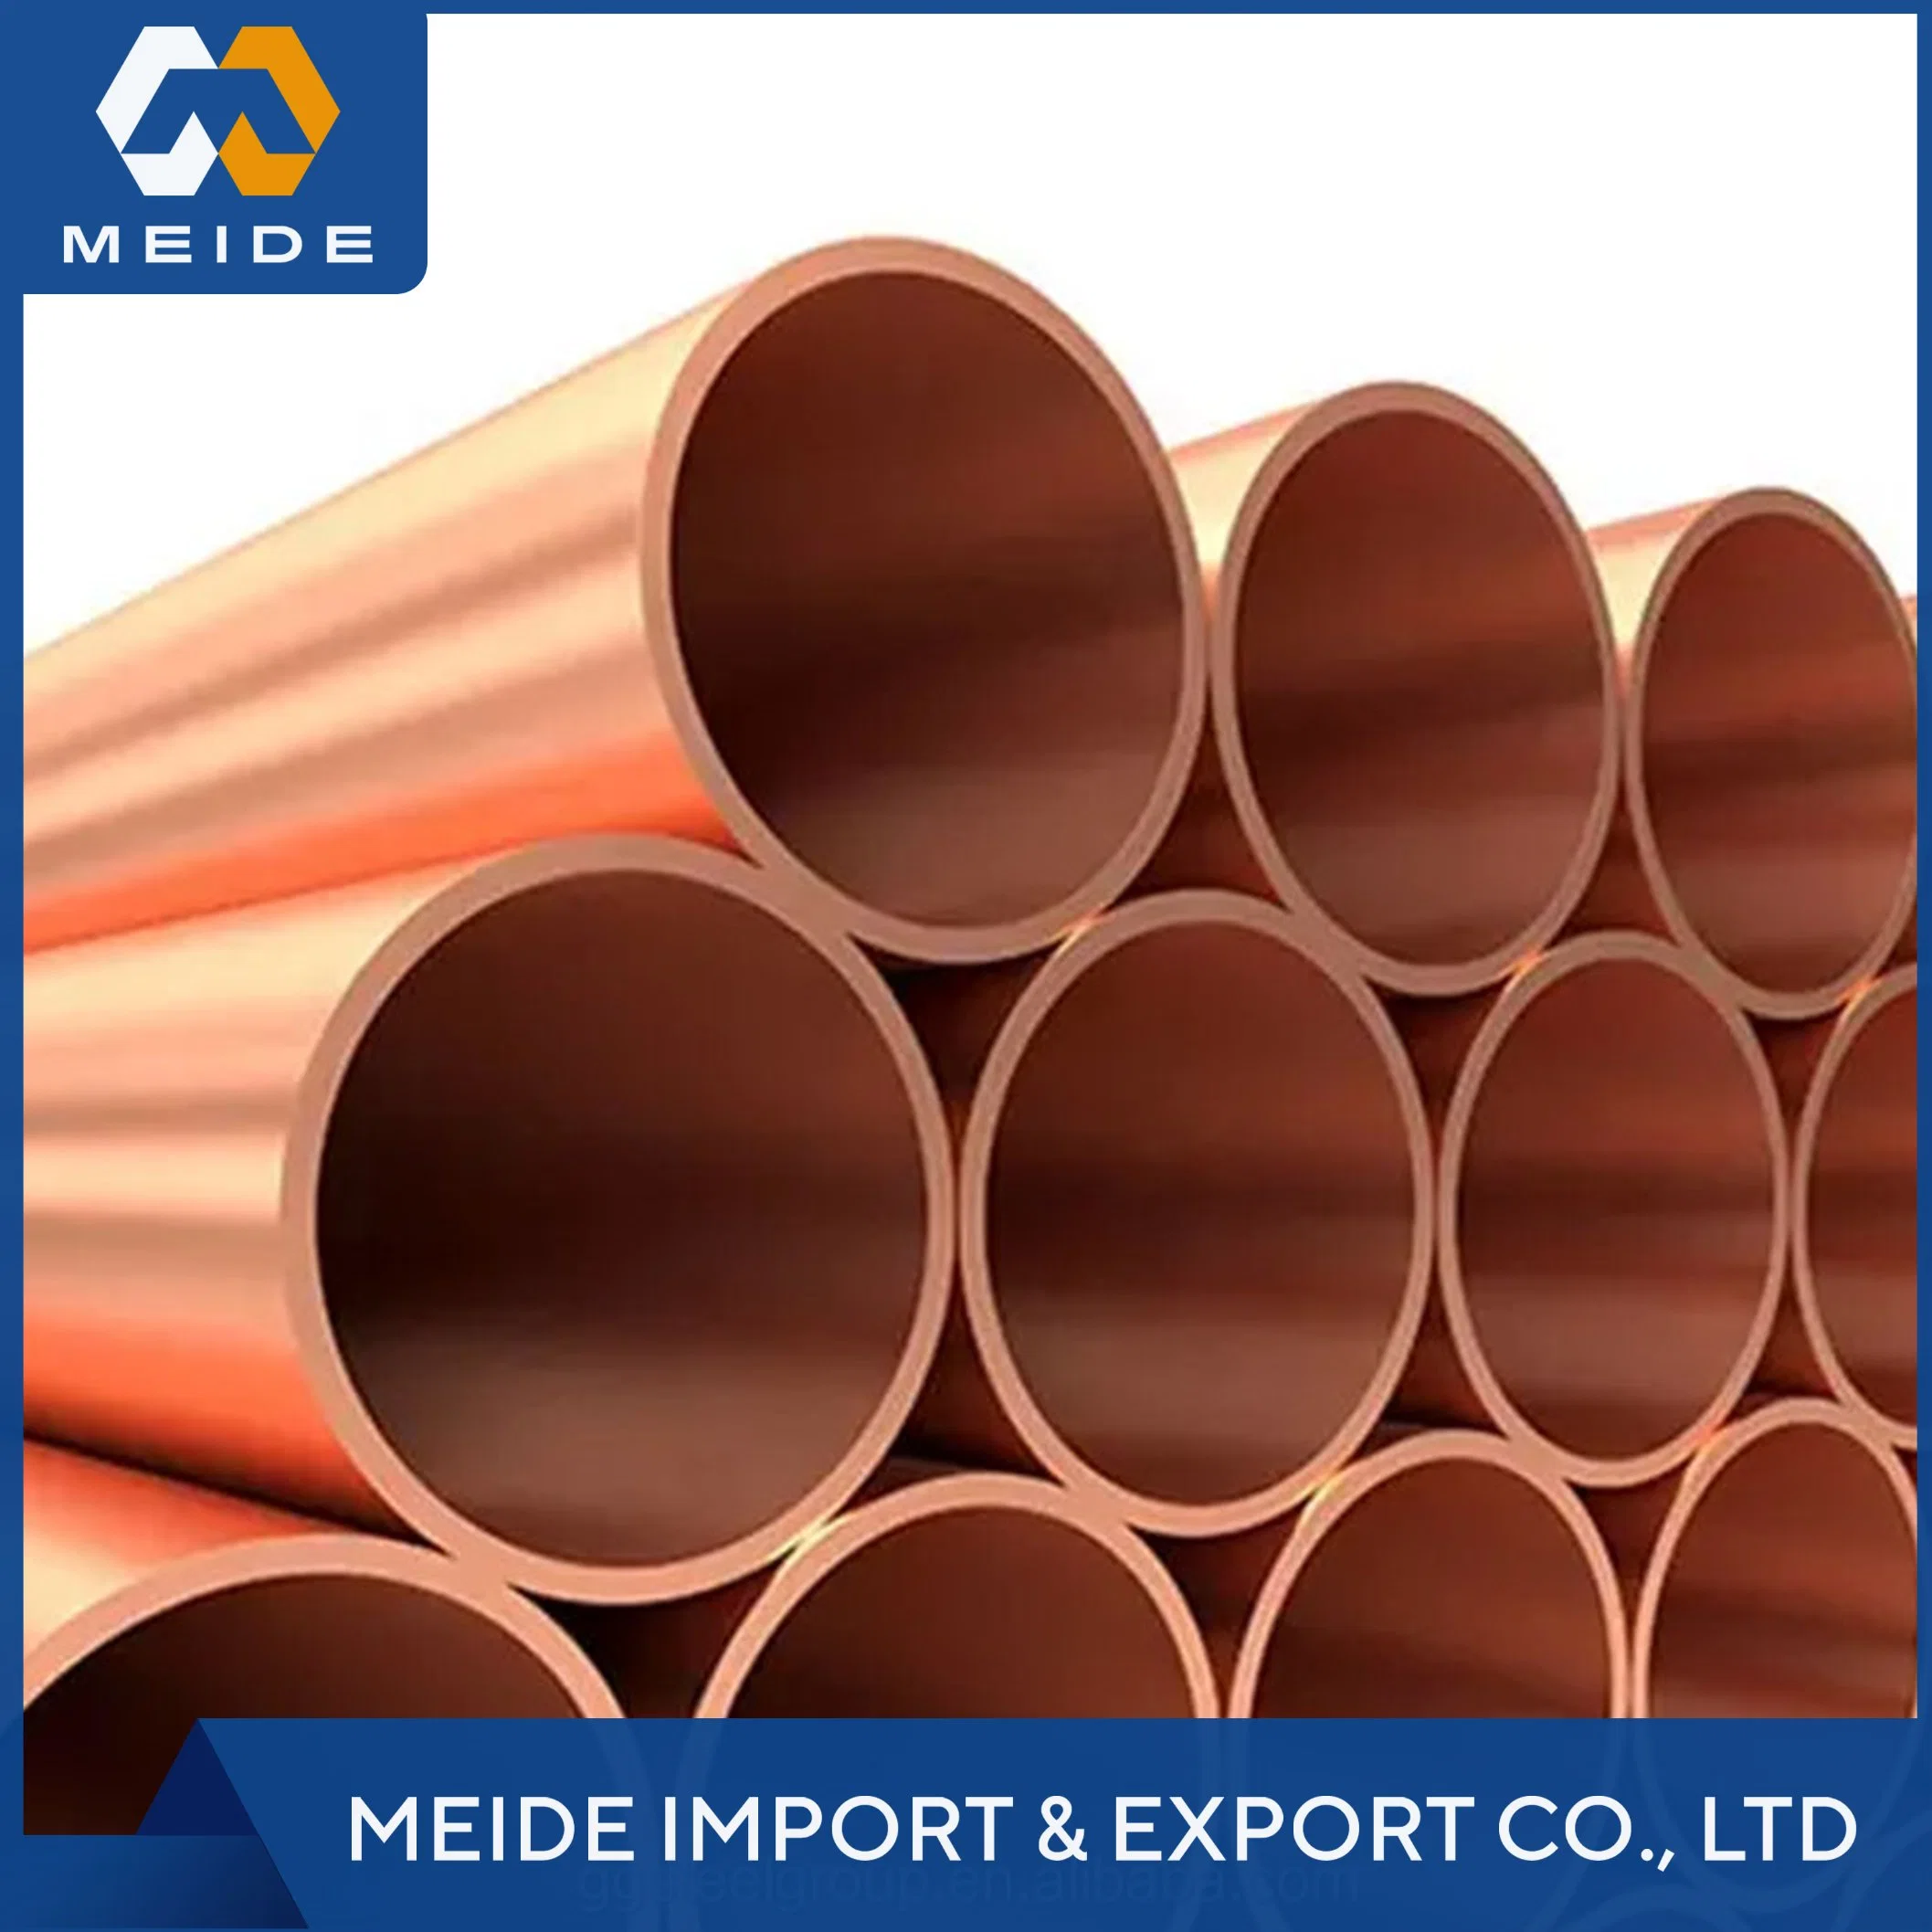 The Best-Selling Flexible Shape C3771 C3700 C3600 C2700 Is Used in HVAC and Fire Sprinkler Copper Pipe